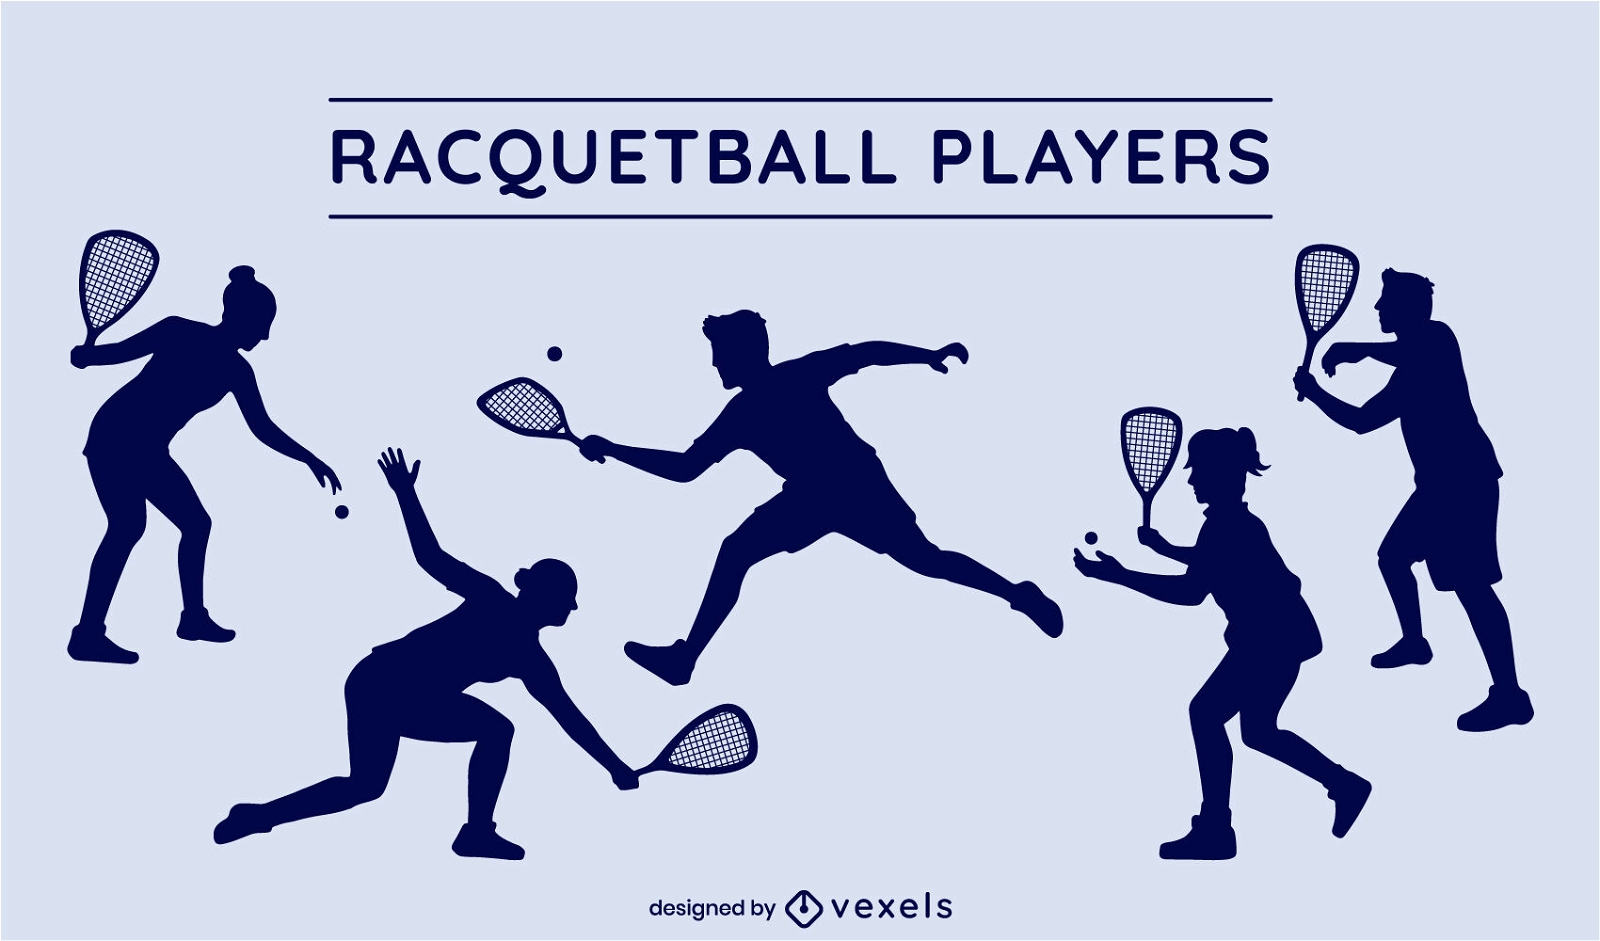 Racquetball players silhouettes set